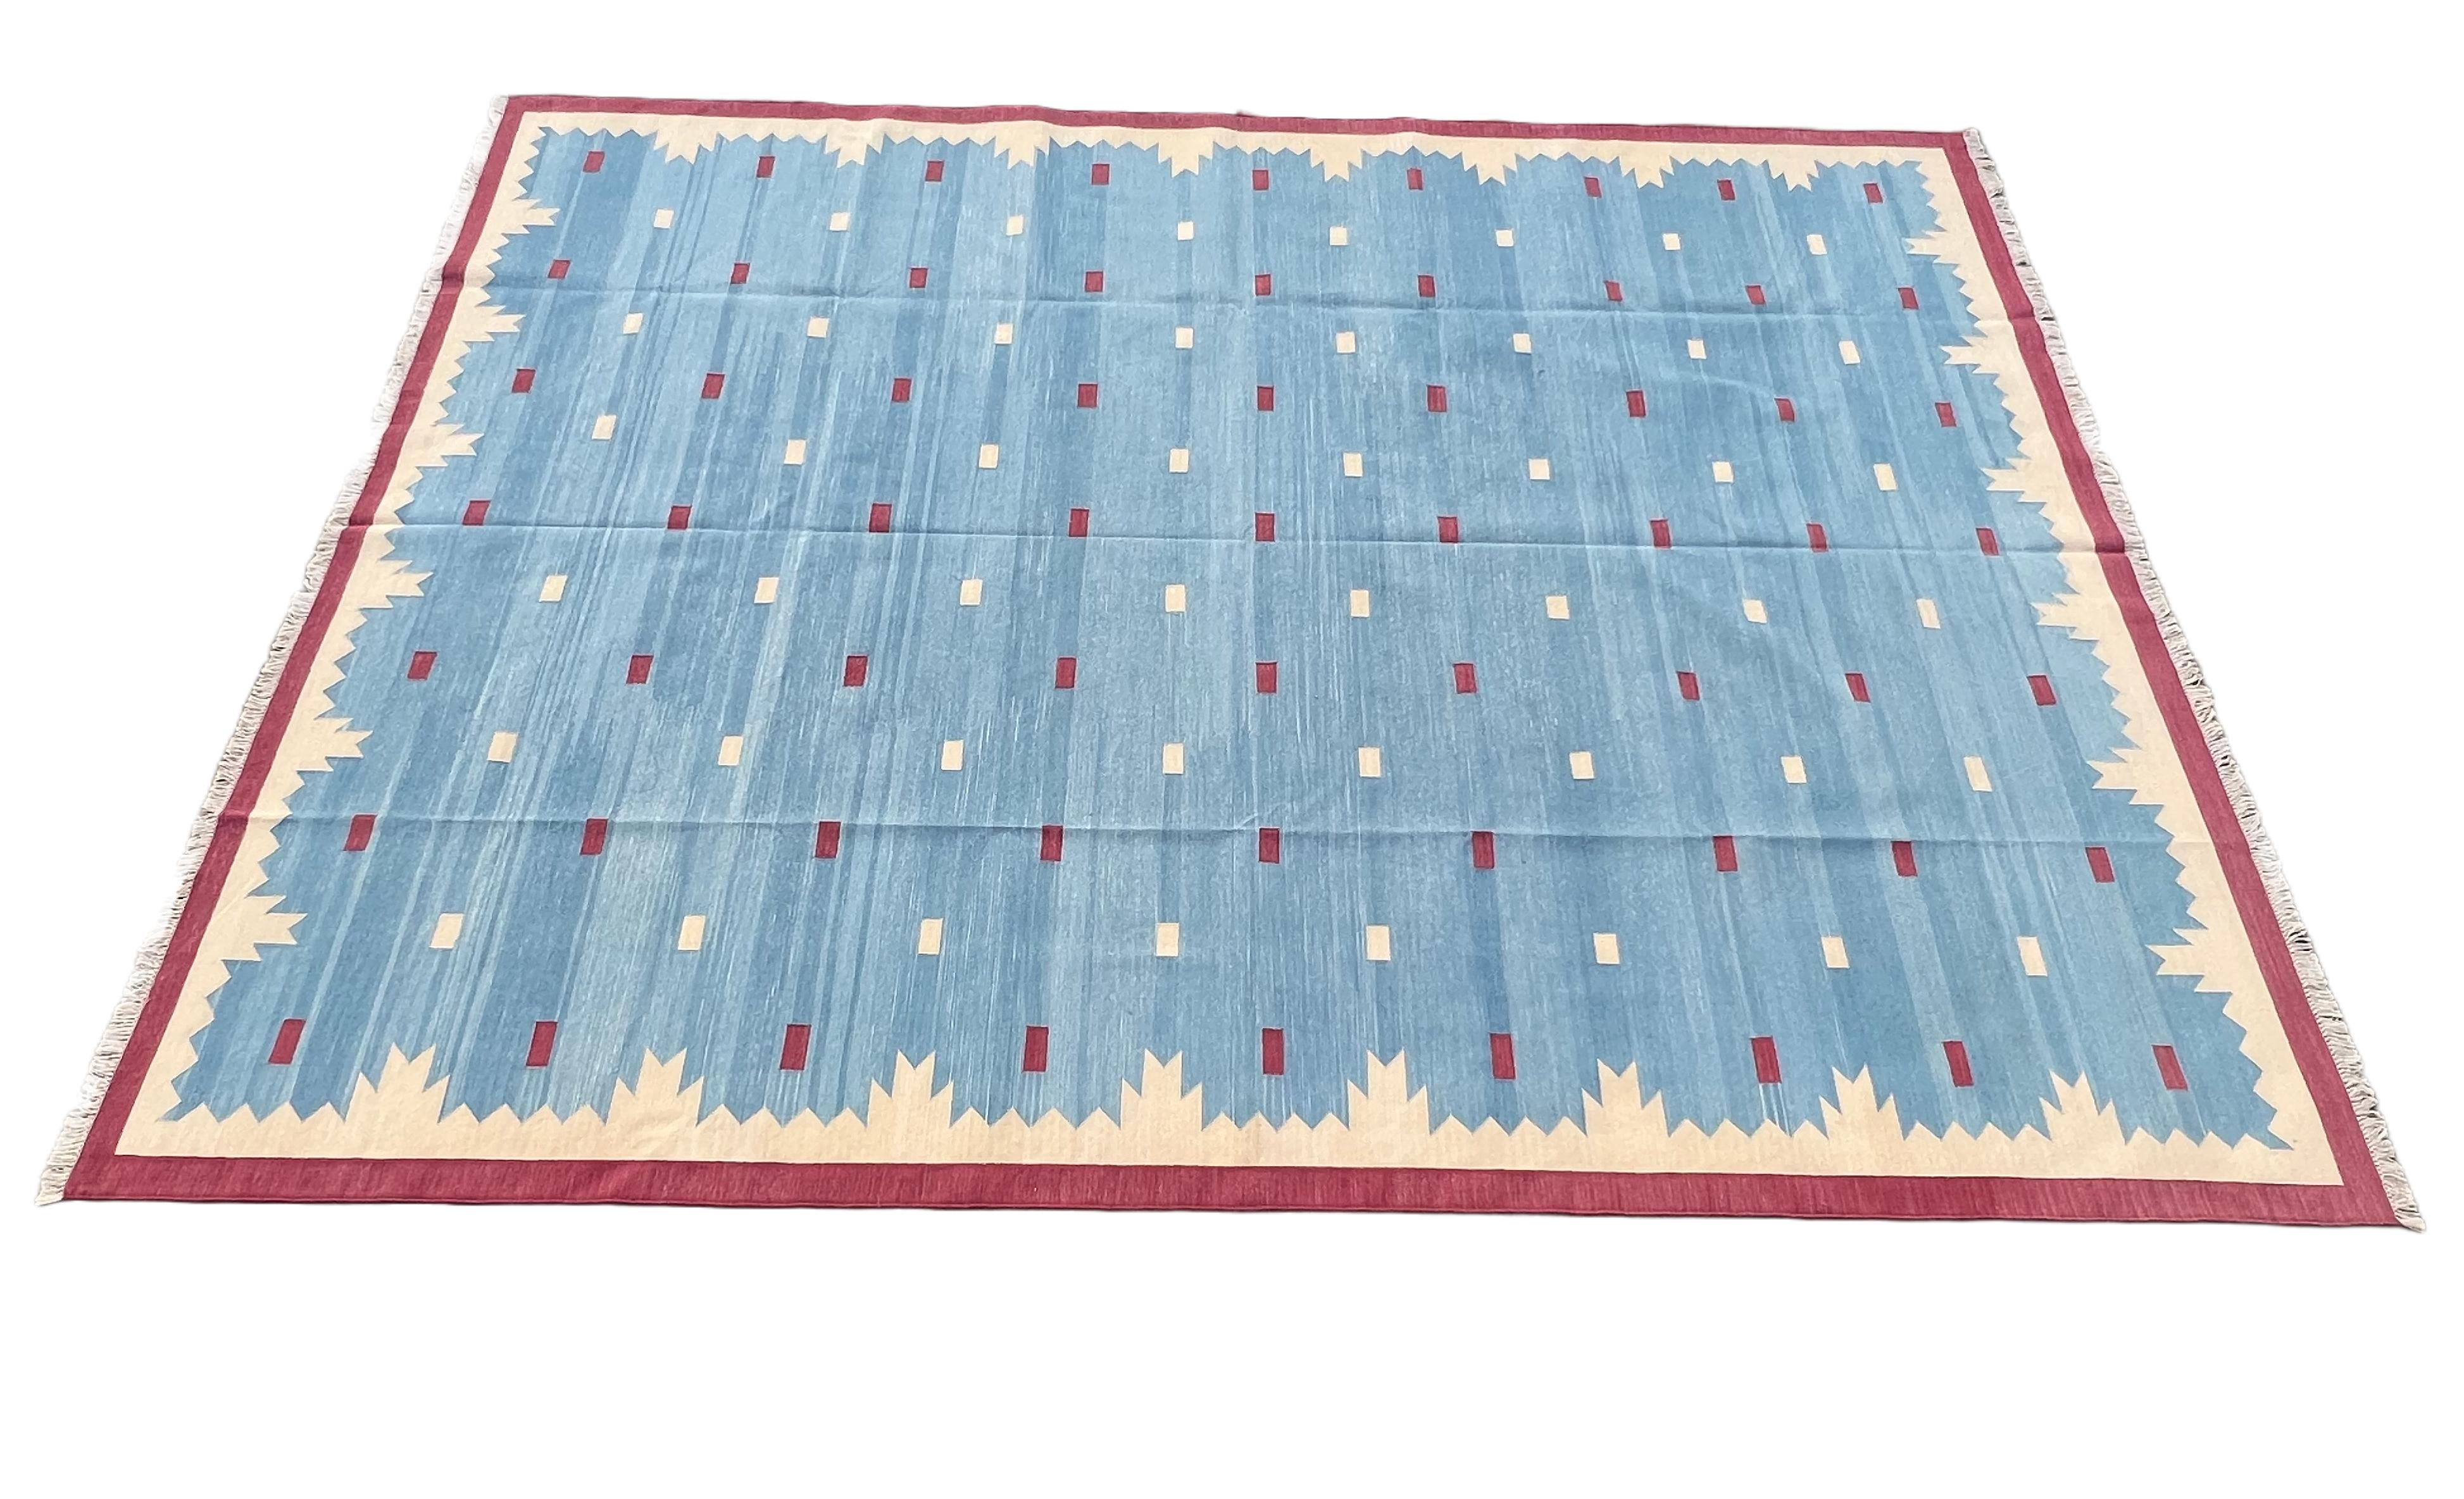 Hand-Woven Handmade Cotton Area Flat Weave Rug, Blue And Pink Geometric Indian Dhurrie Rug For Sale